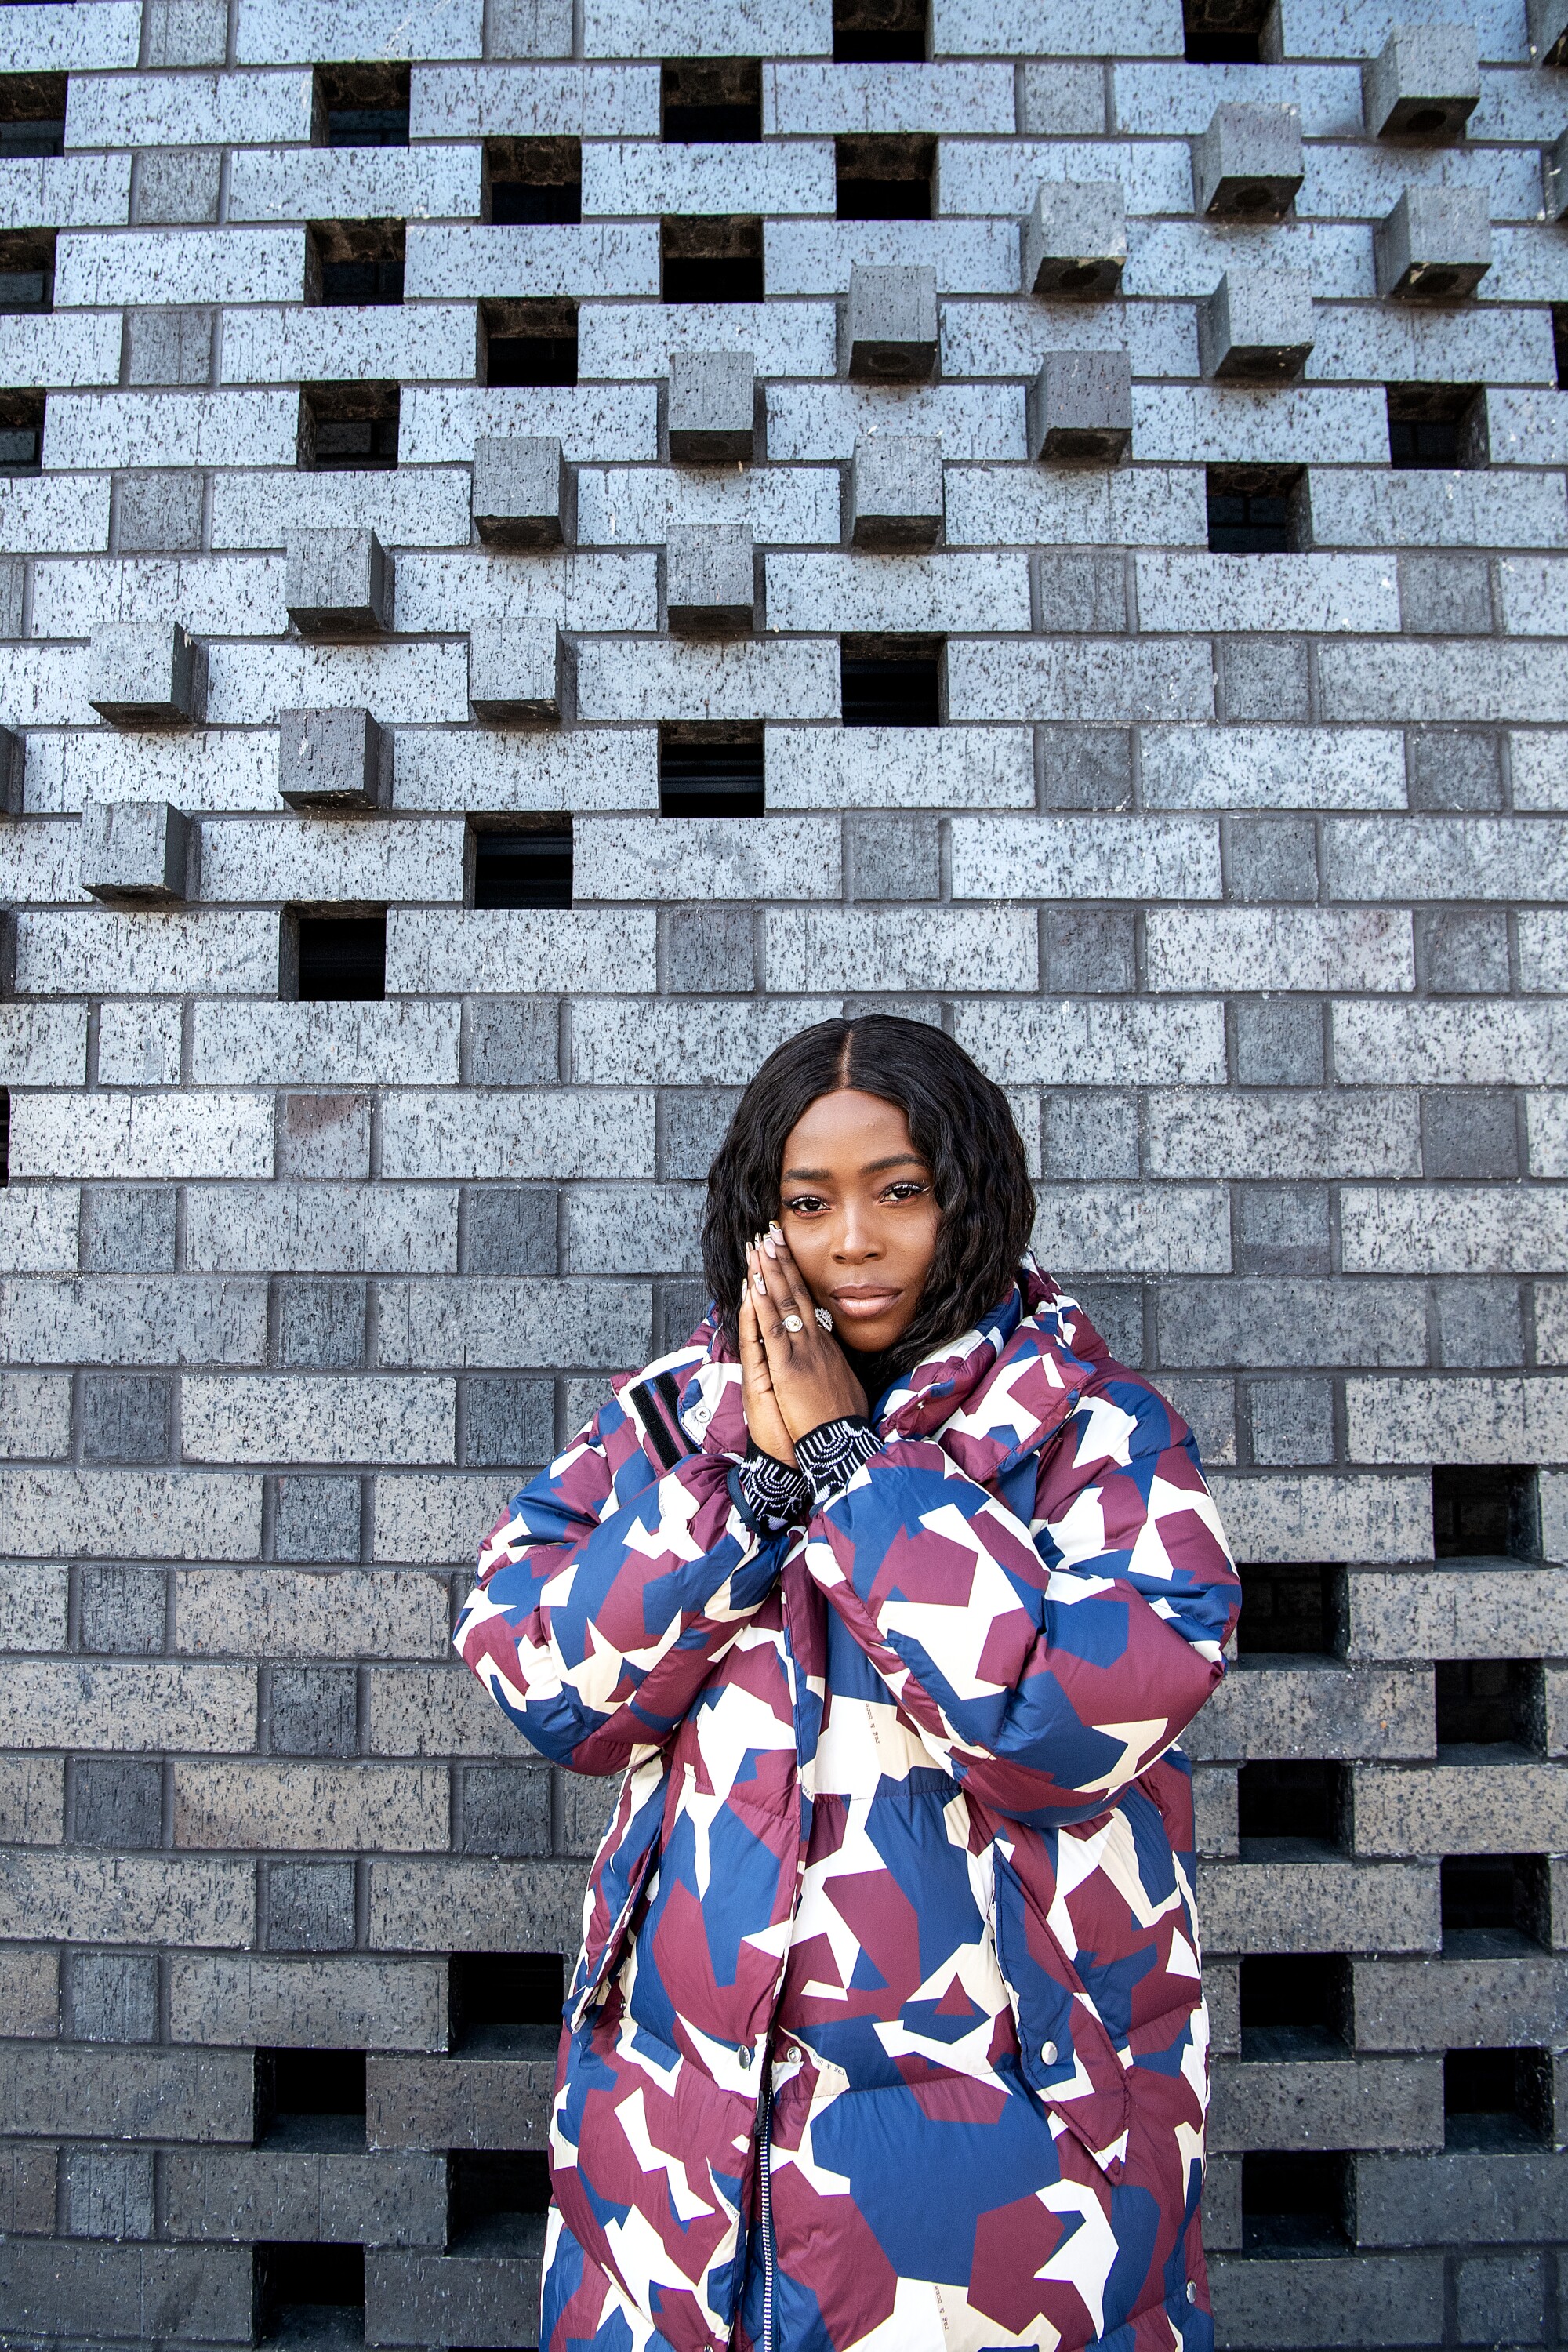 A woman in a colorful coat stands in front of a patterned wall.